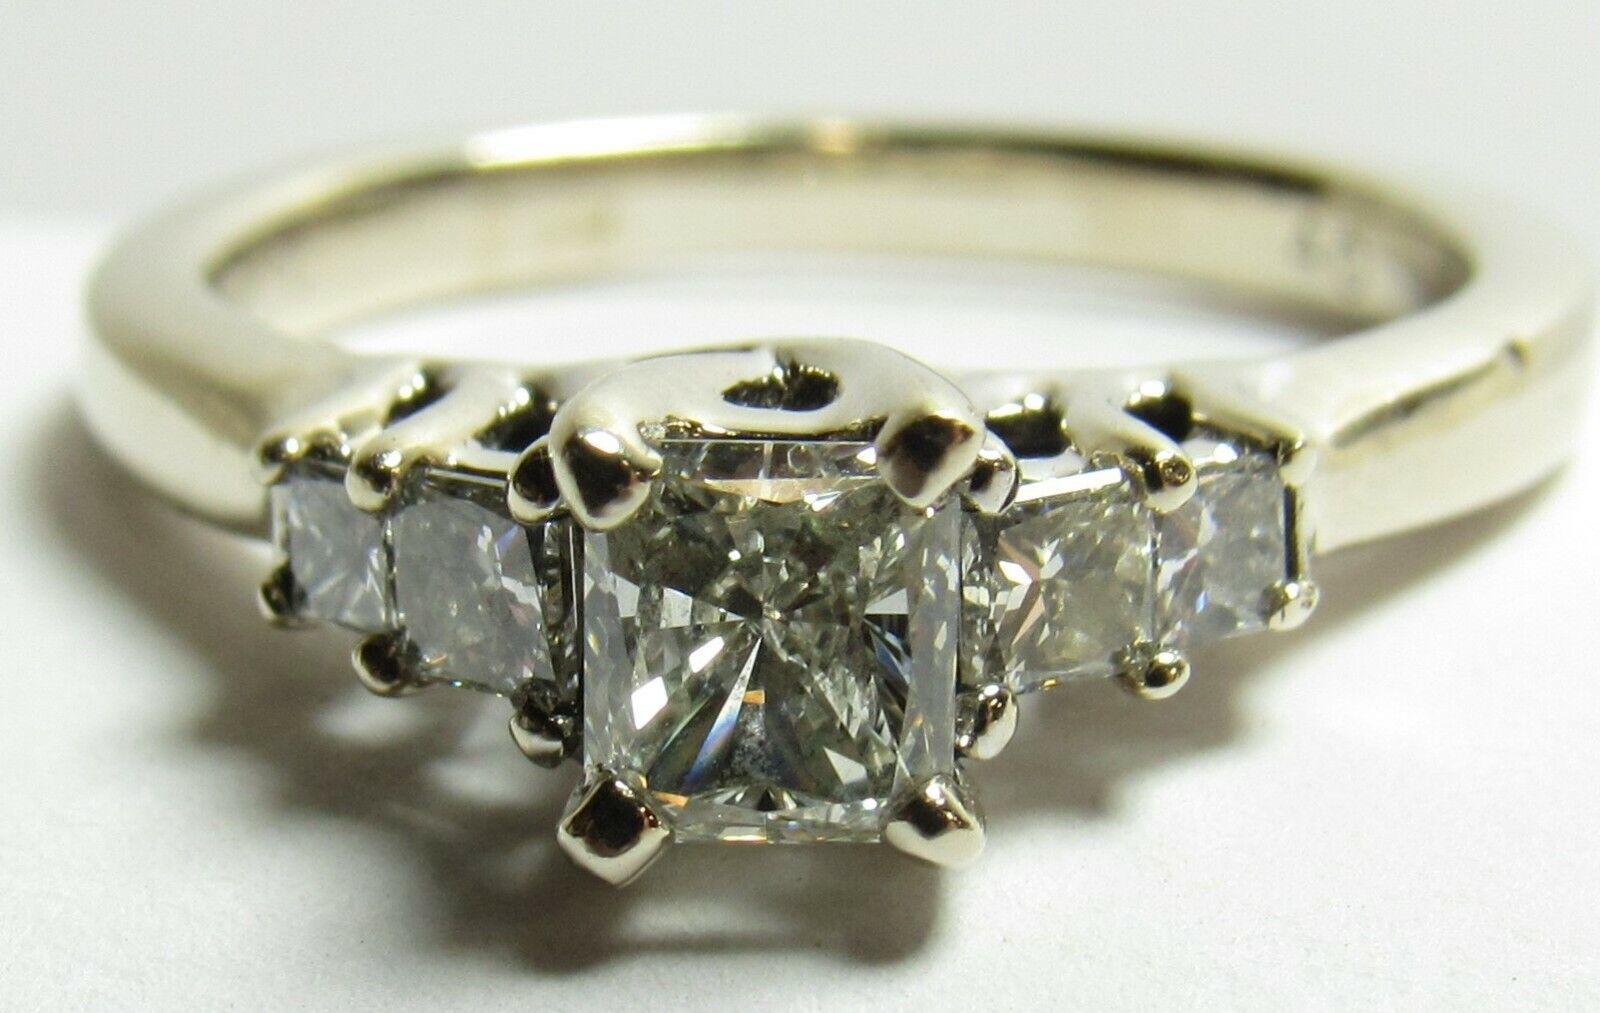 Primary image for Authenticity Guarantee 
Leo Schachter 14K White Gold 5 Princess Diamond Engag...